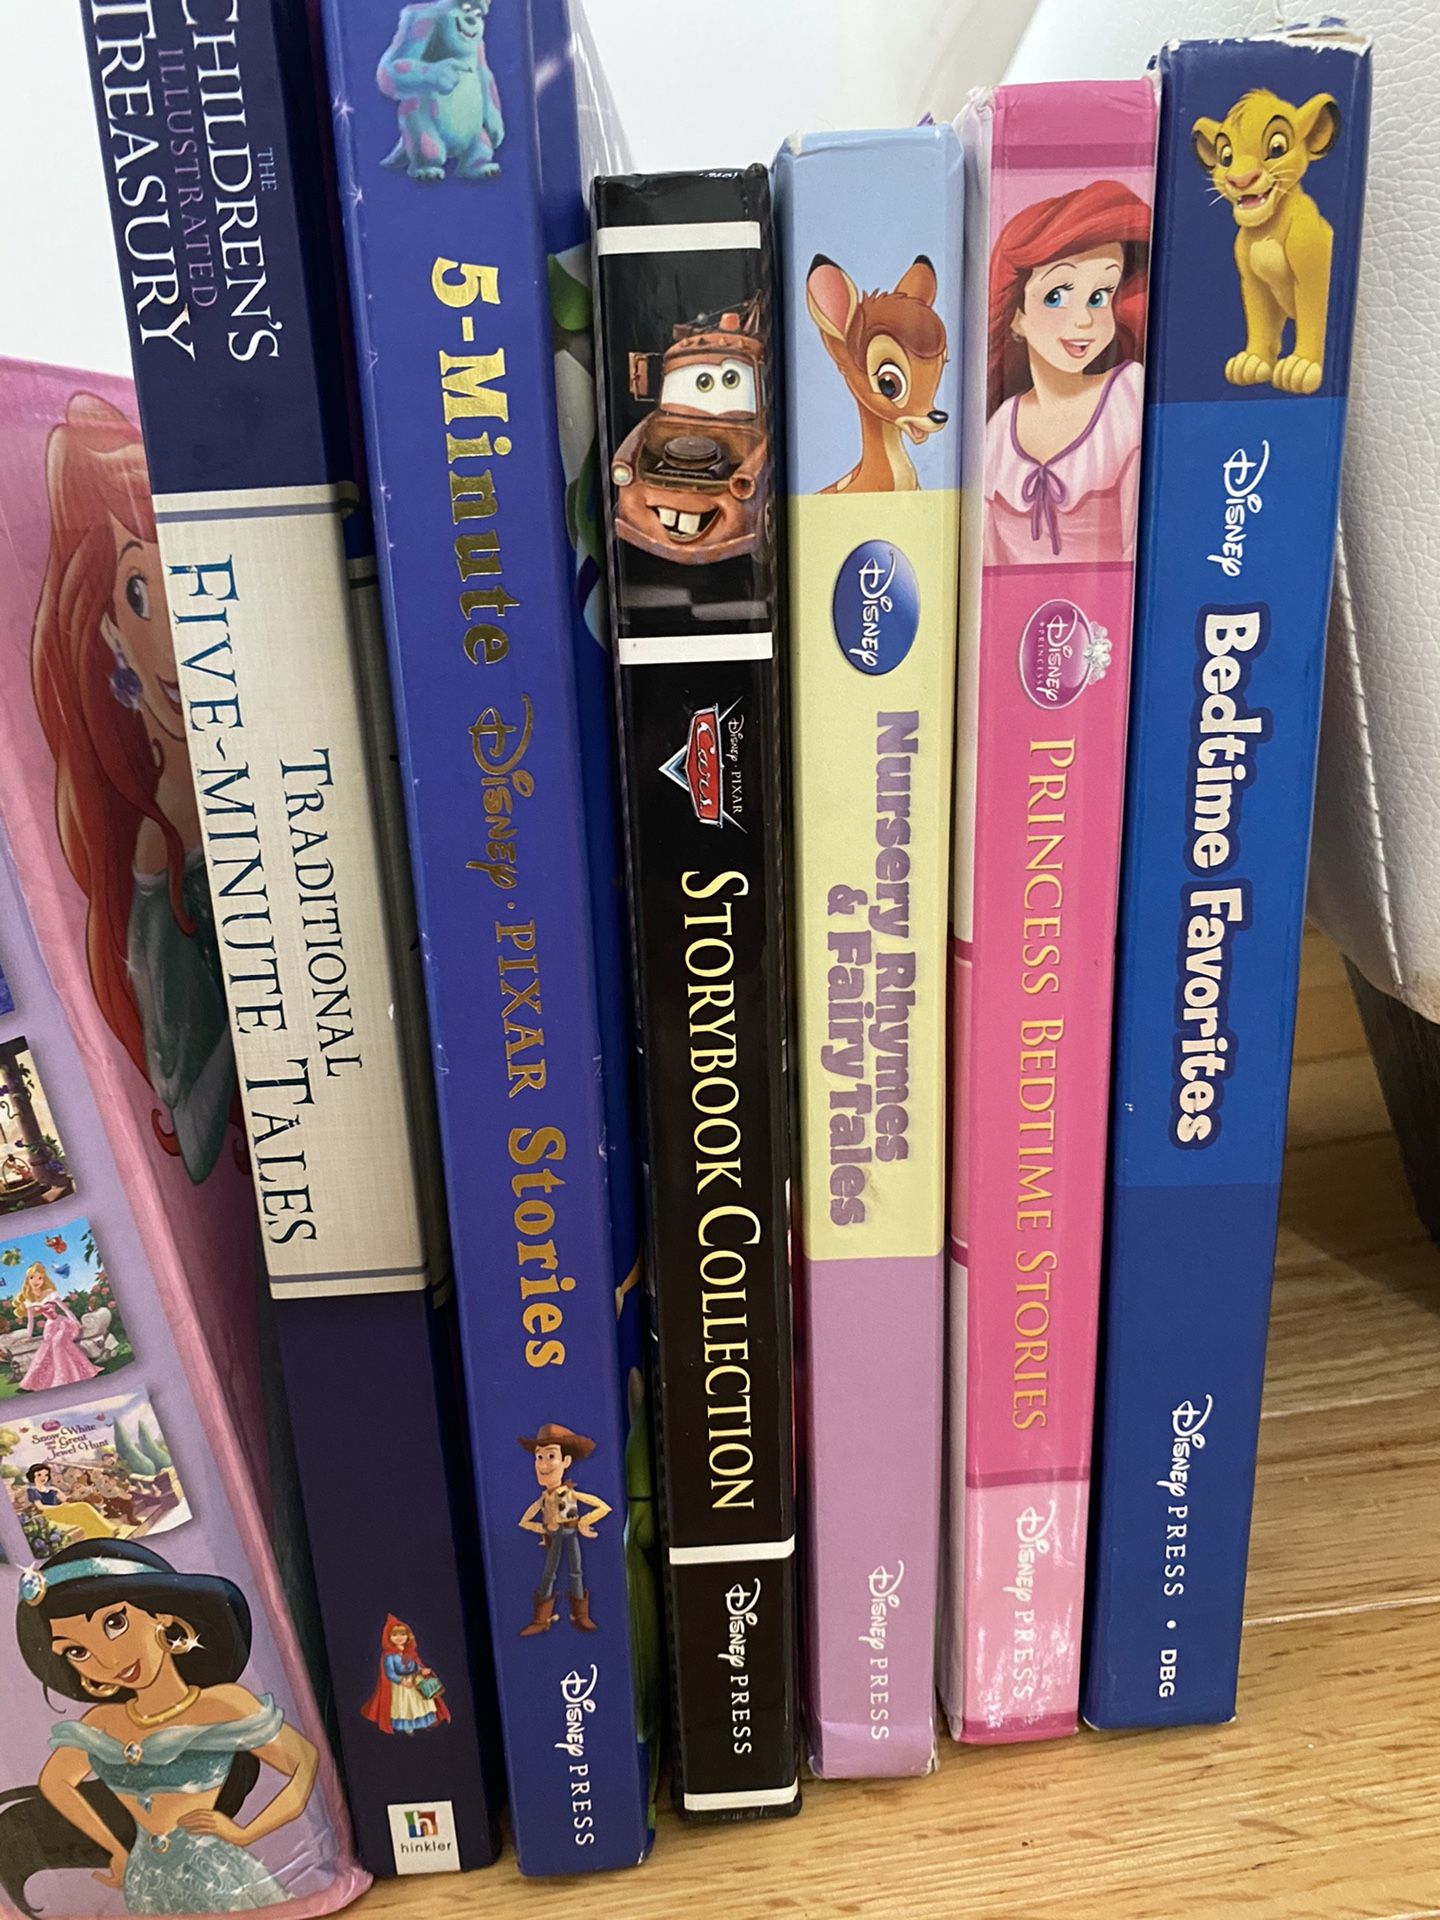 Free Disney story books for a new home. Perfect condition